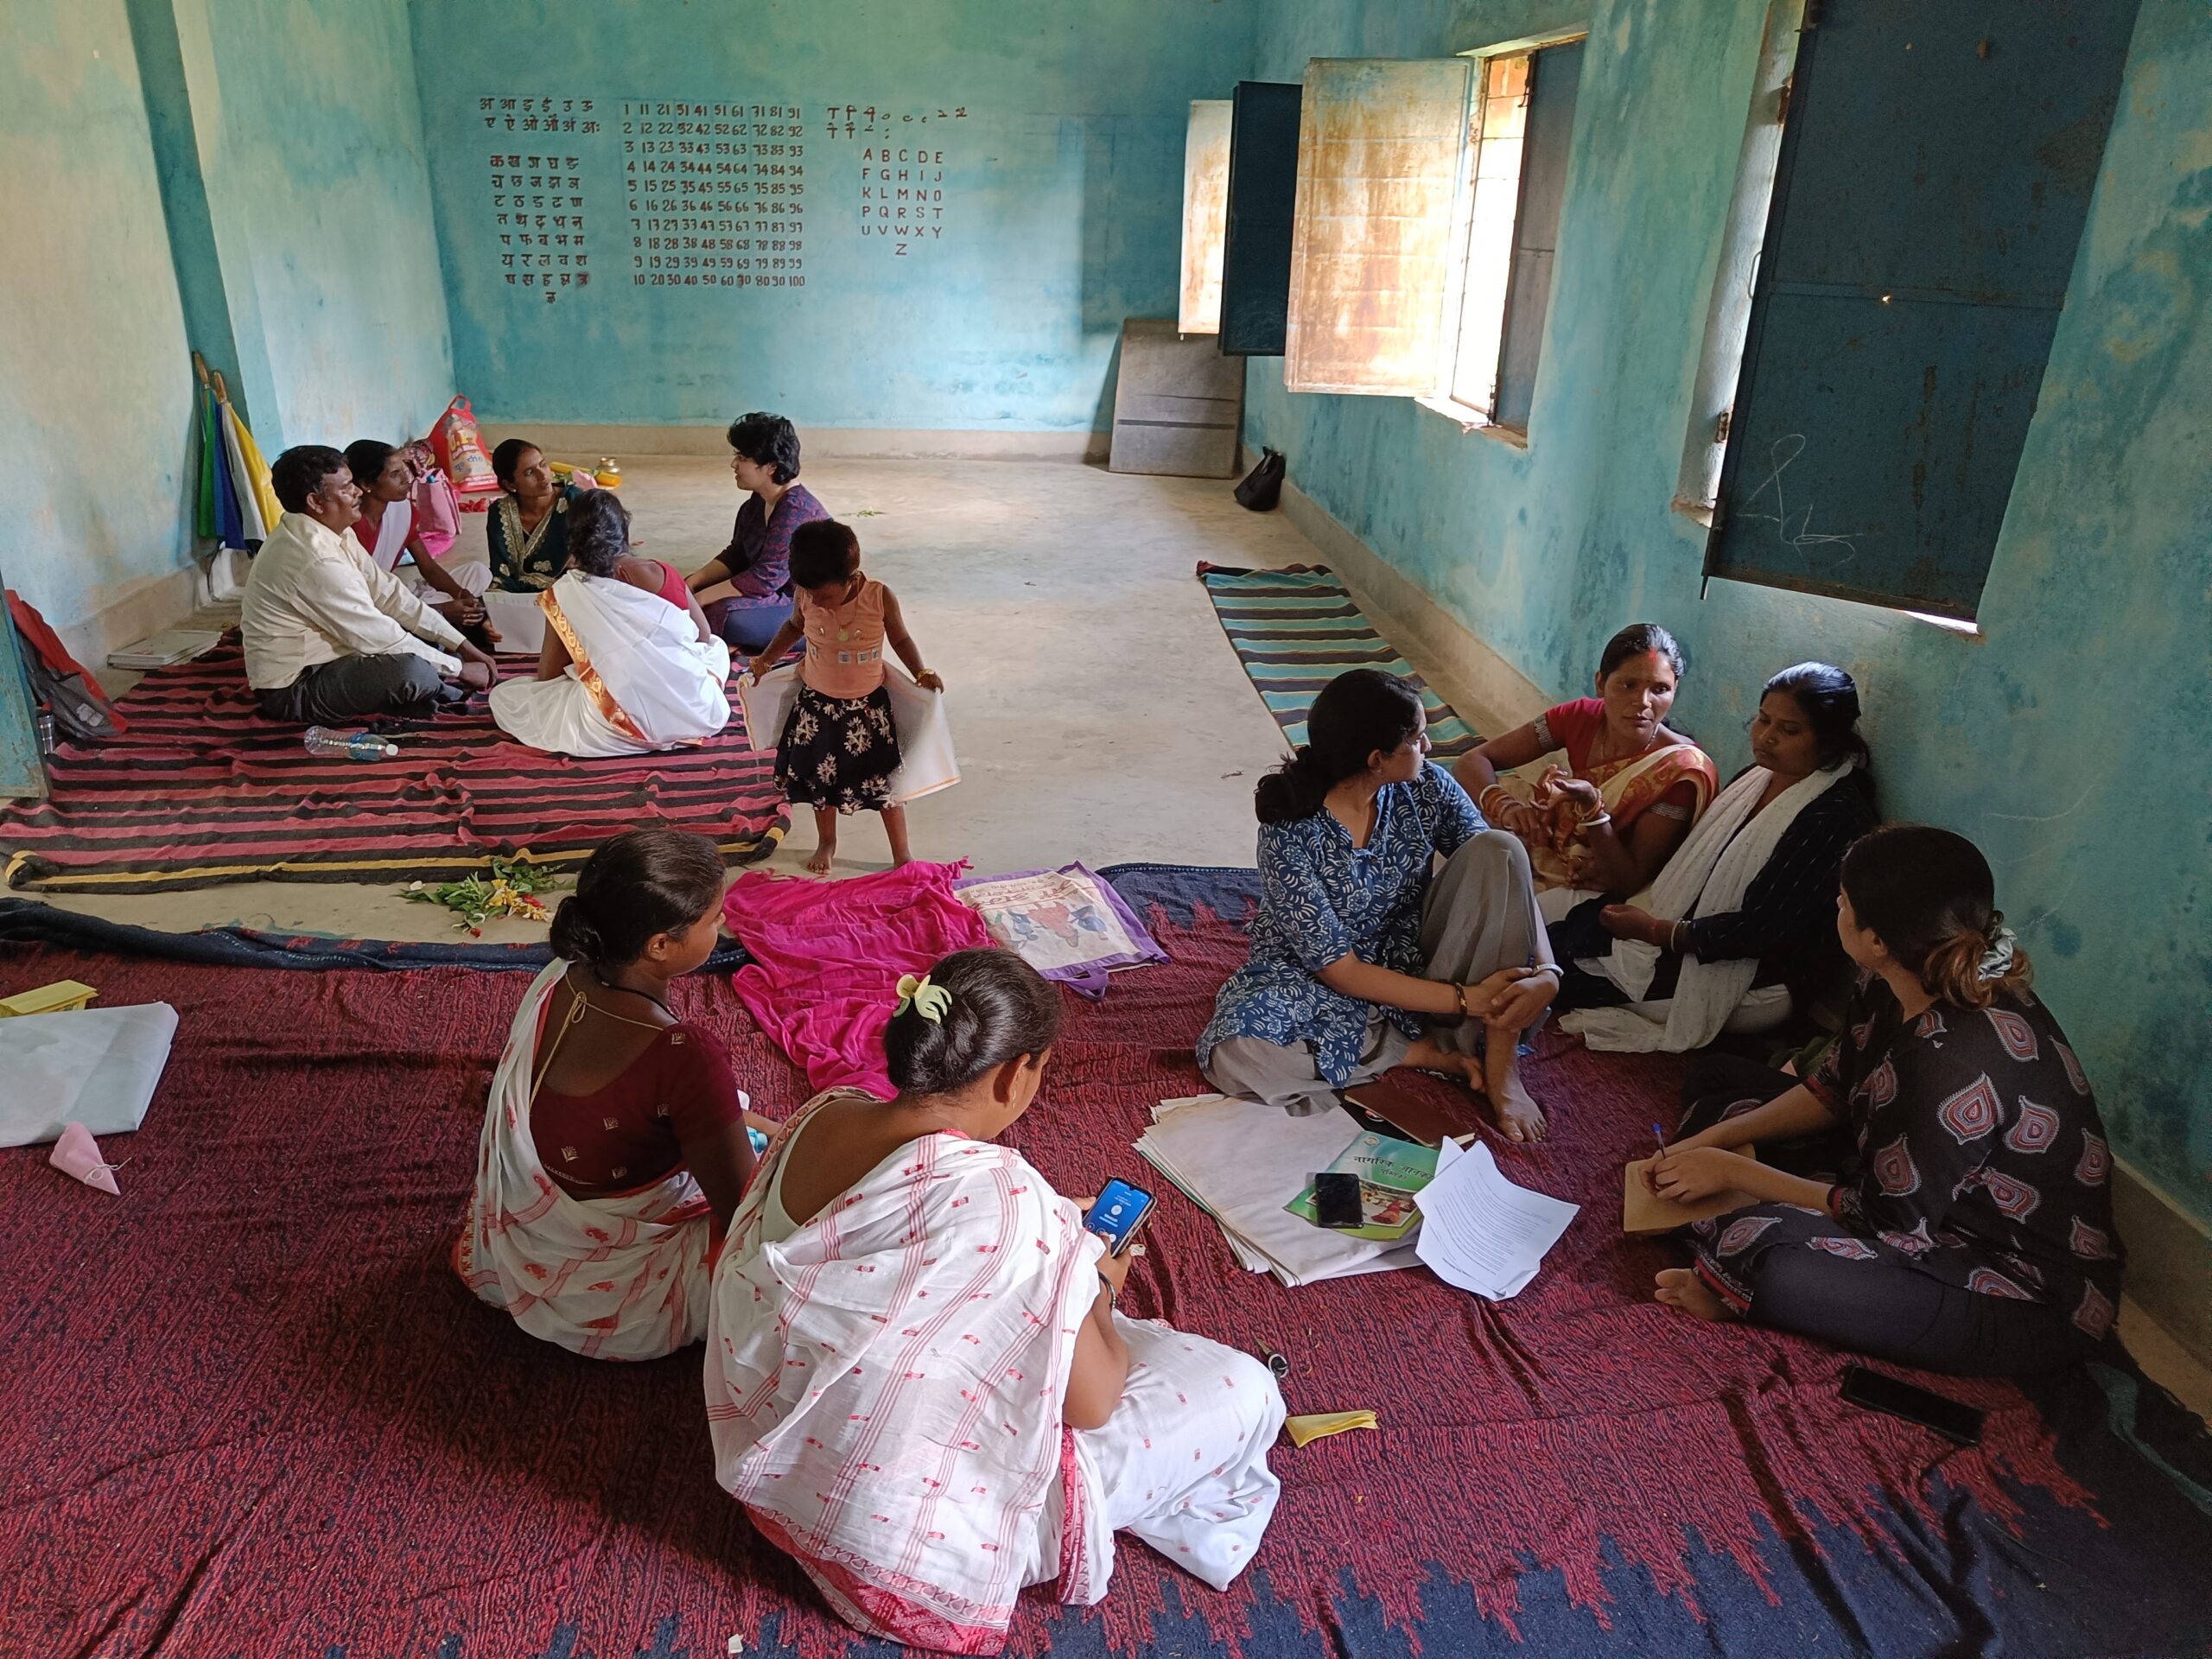 Knowledge sharing: WELL Labs researchers discuss with Community Resource Persons in Lohardaga village in Jharkhand to understand how they access and share knowledge.